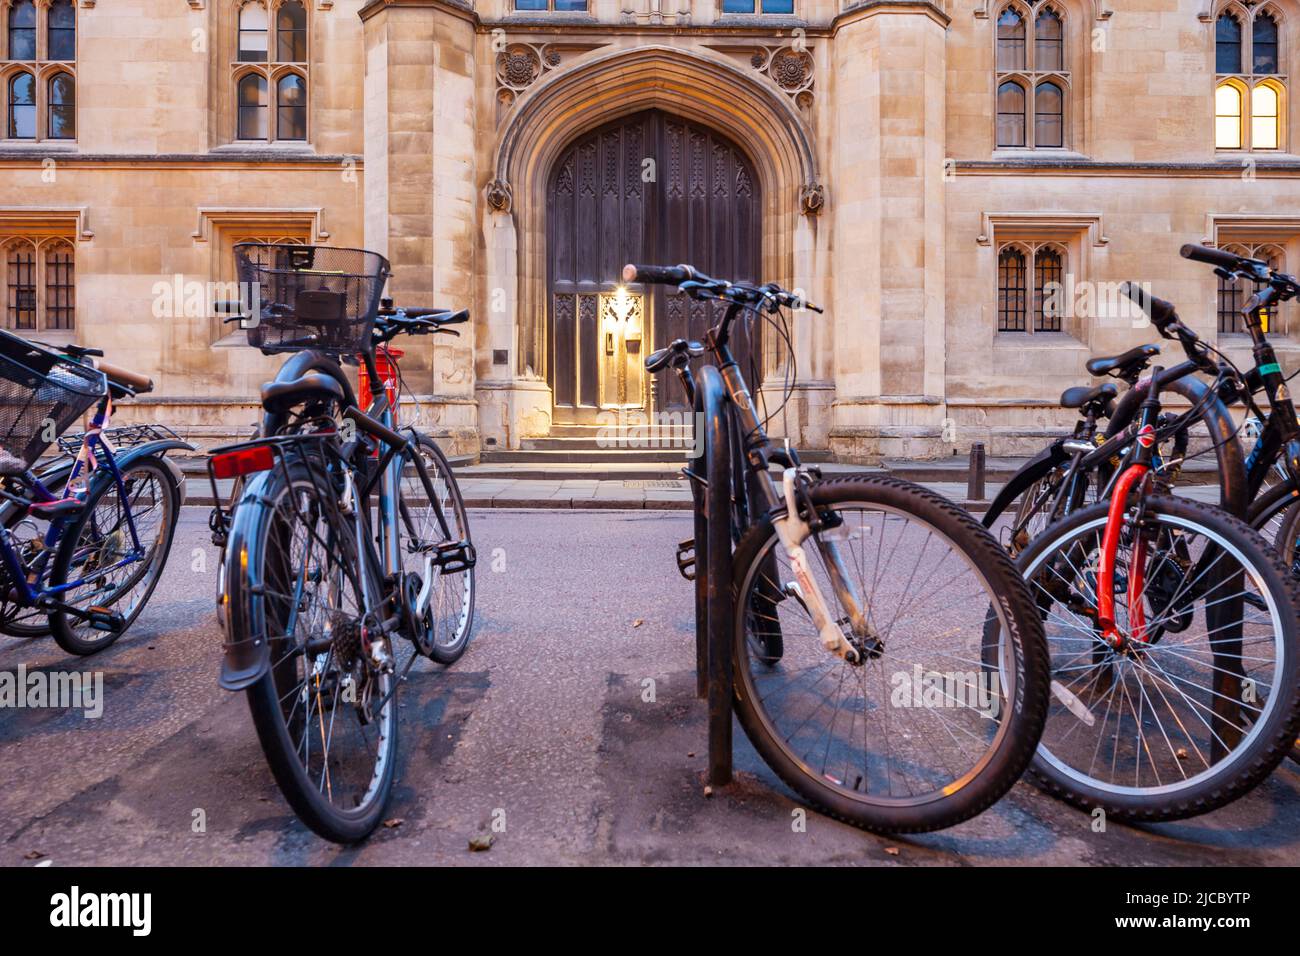 Bicycles parked in front of Corpus Christi College, Cambridge, England. Stock Photo